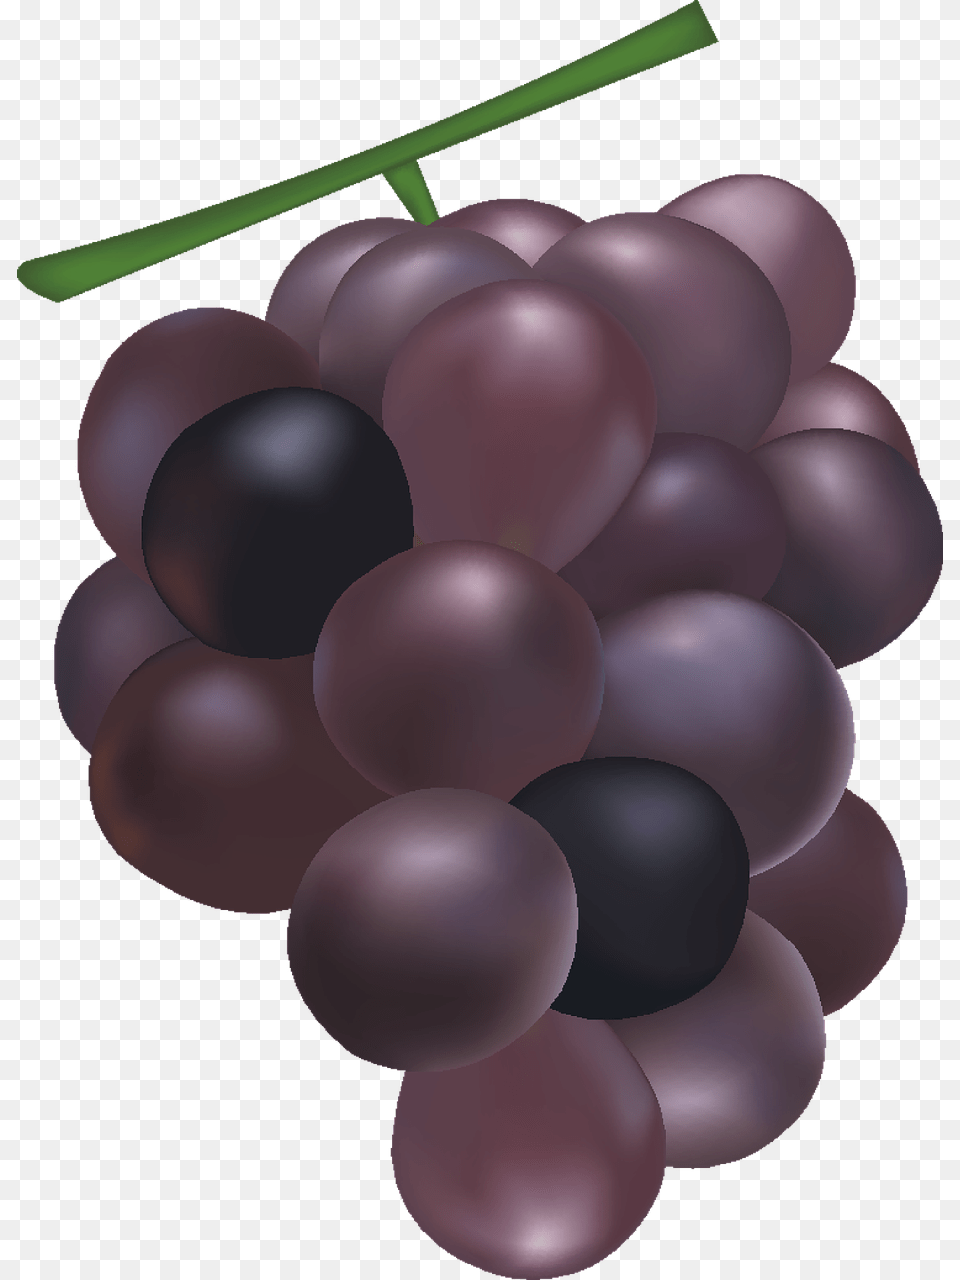 Grapes Mesh Vector Graphics Photo Grapes Mesh, Food, Fruit, Plant, Produce Free Png Download